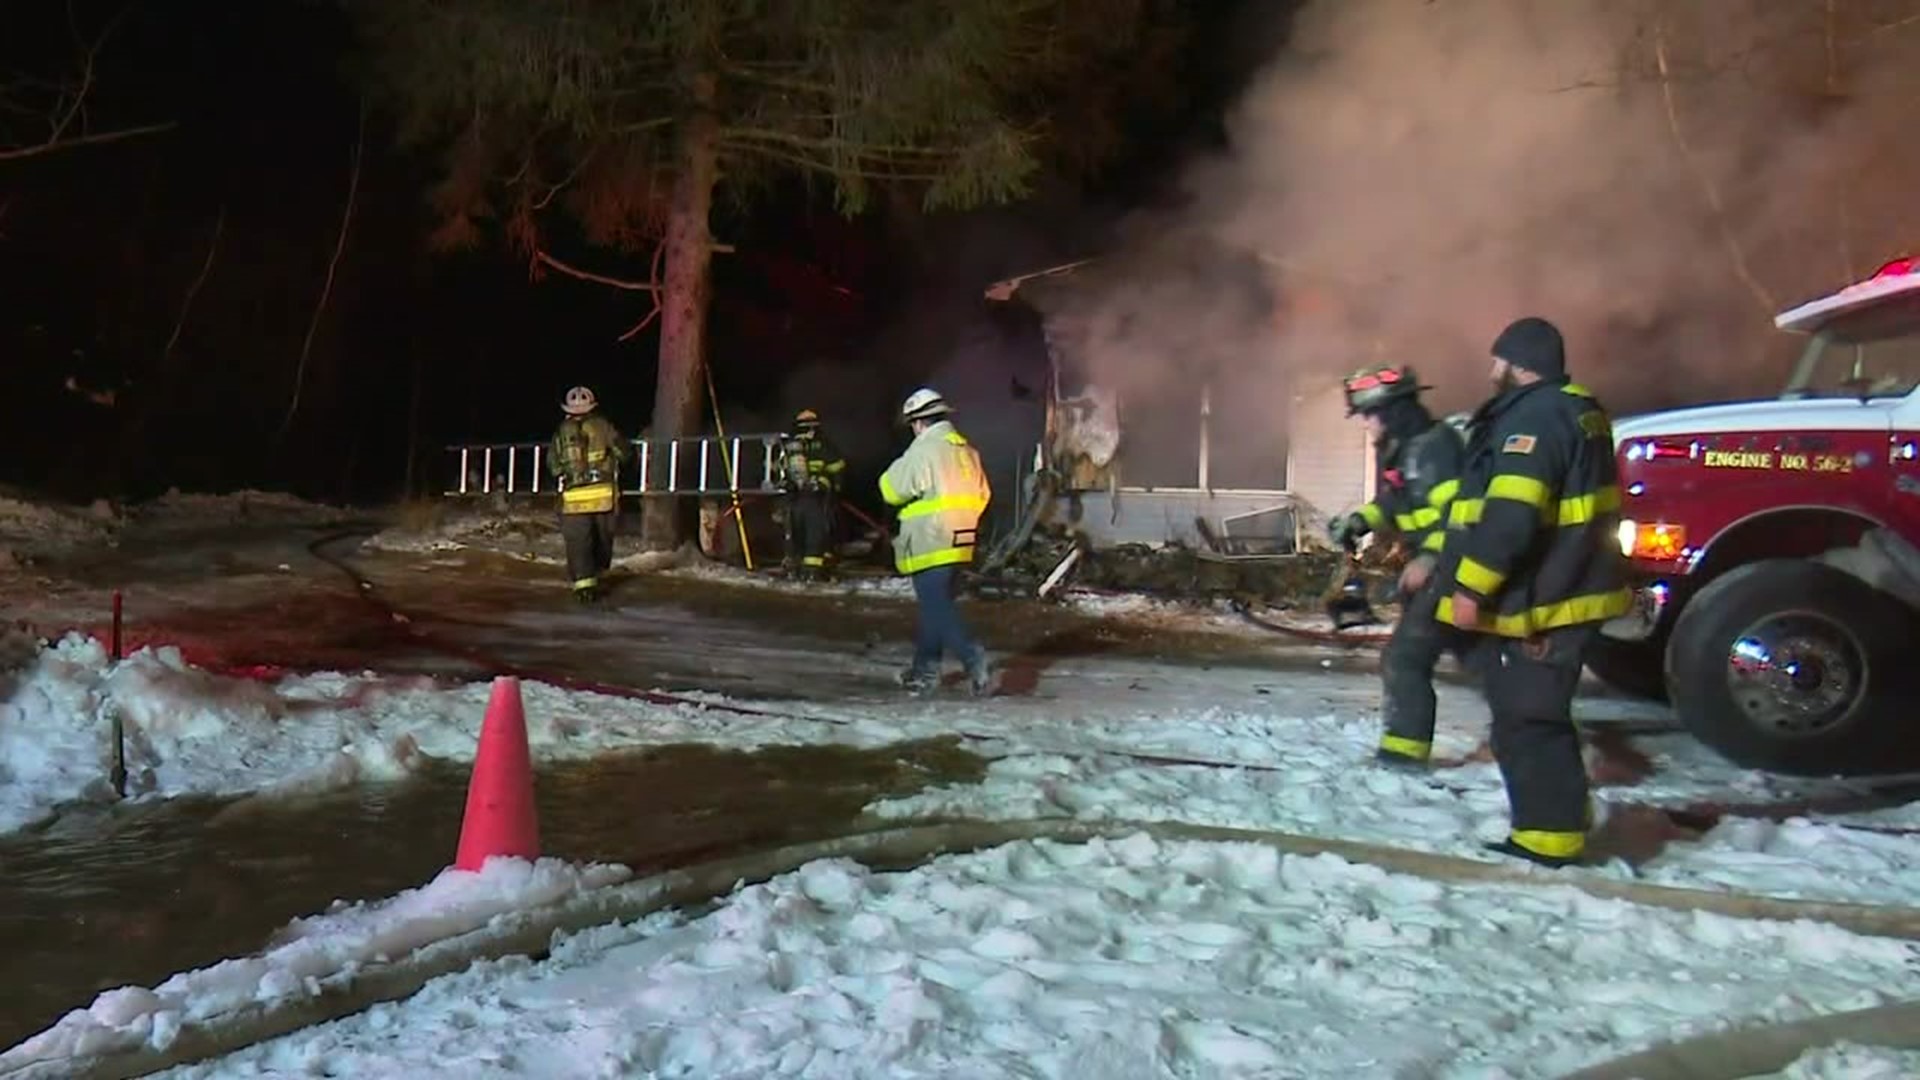 A man is facing charges for setting his home on fire Sunday night in Lackawanna County.